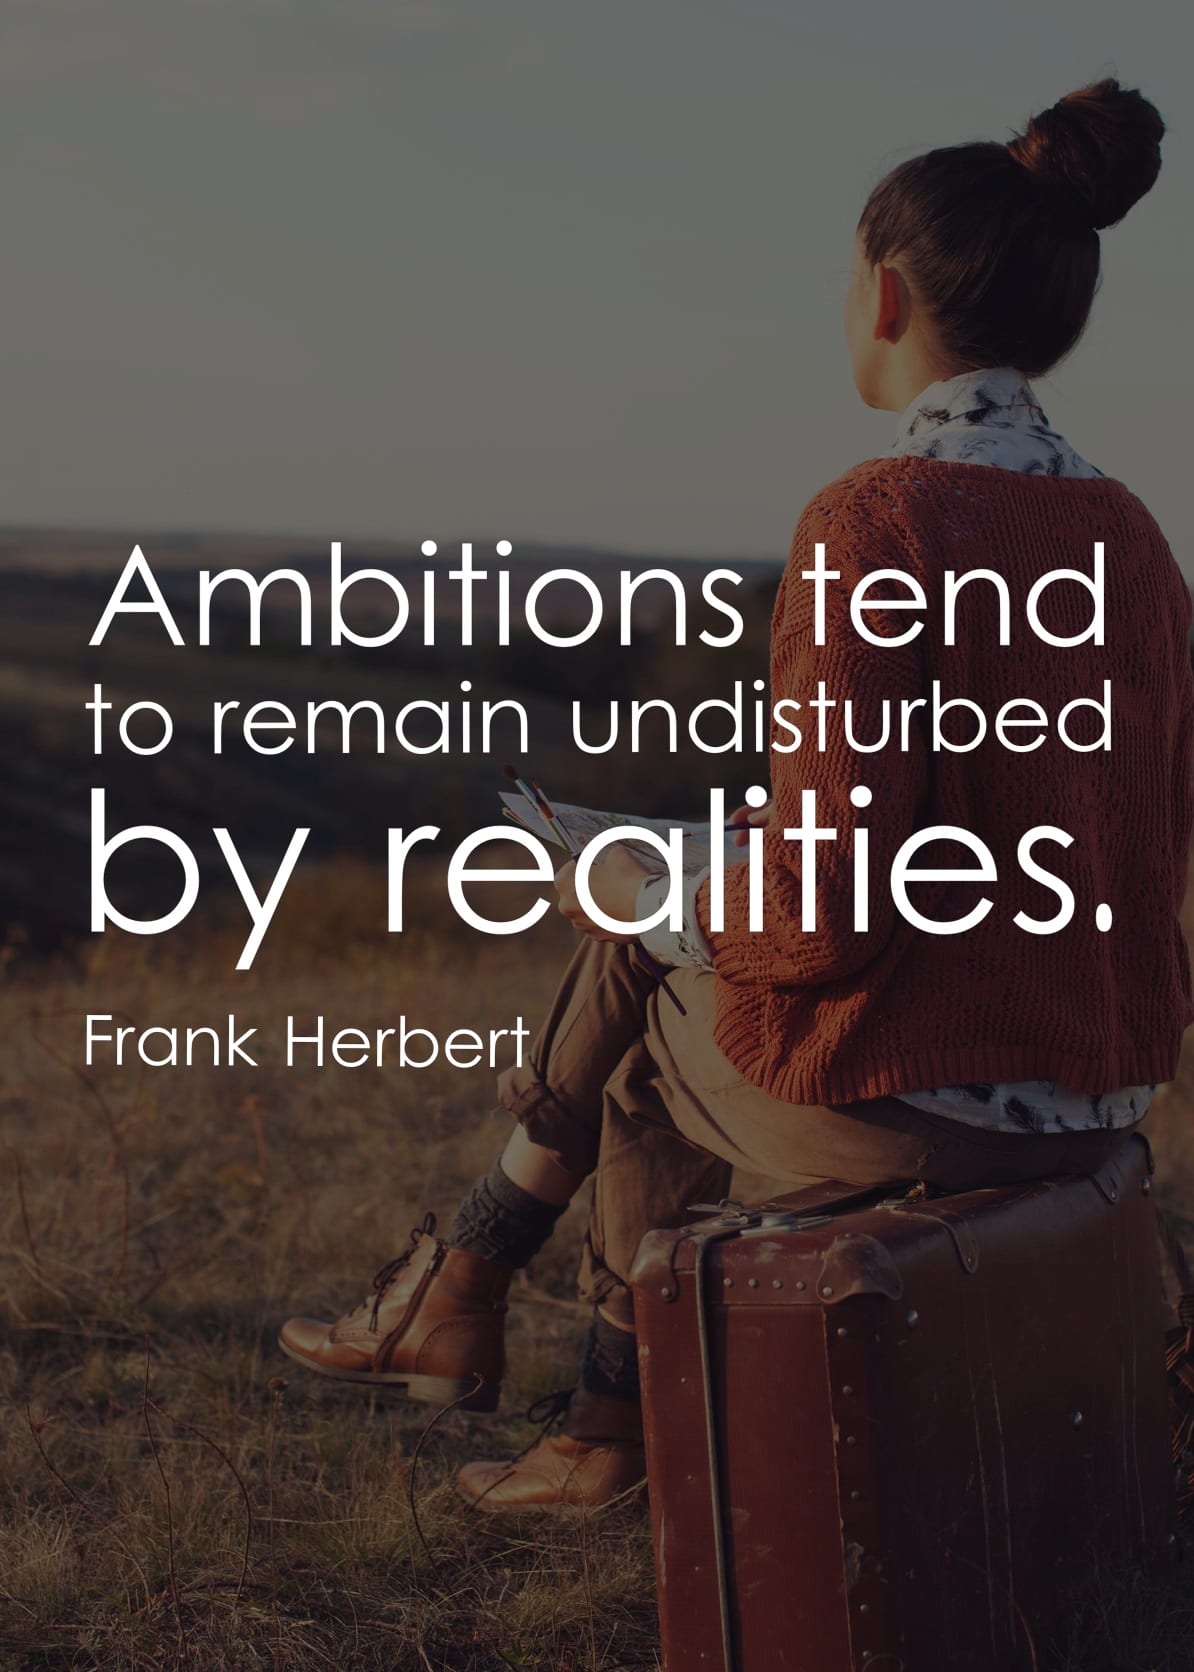 70 Inspirational Ambition Quotes And Sayings